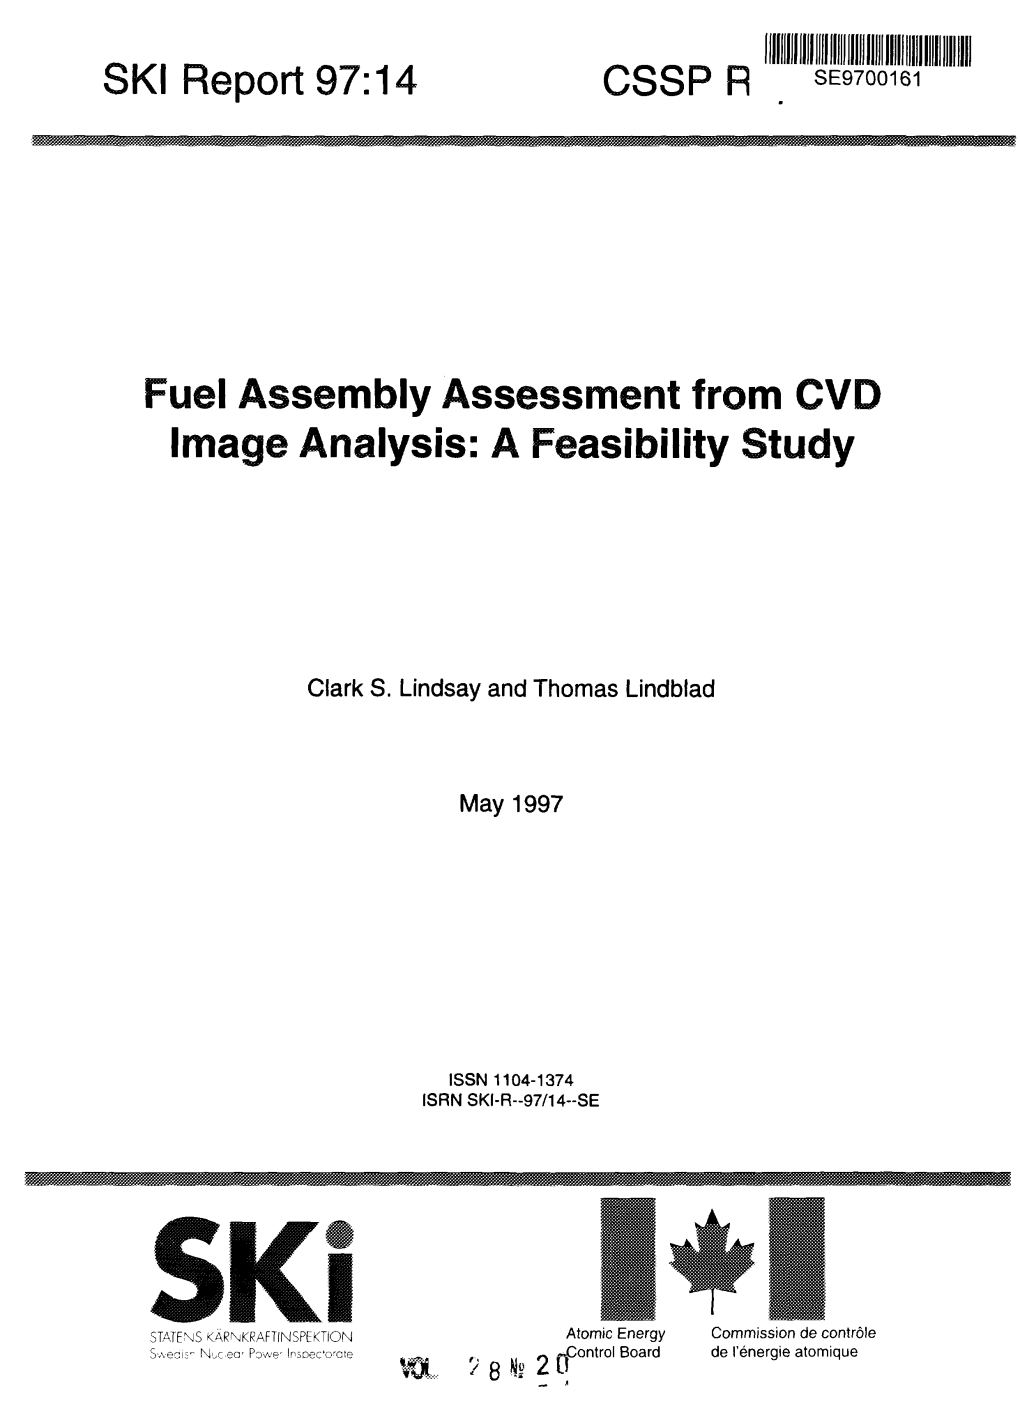 Fuel Assembly Assessment from CVD Image Analysis: a Feasibility Study